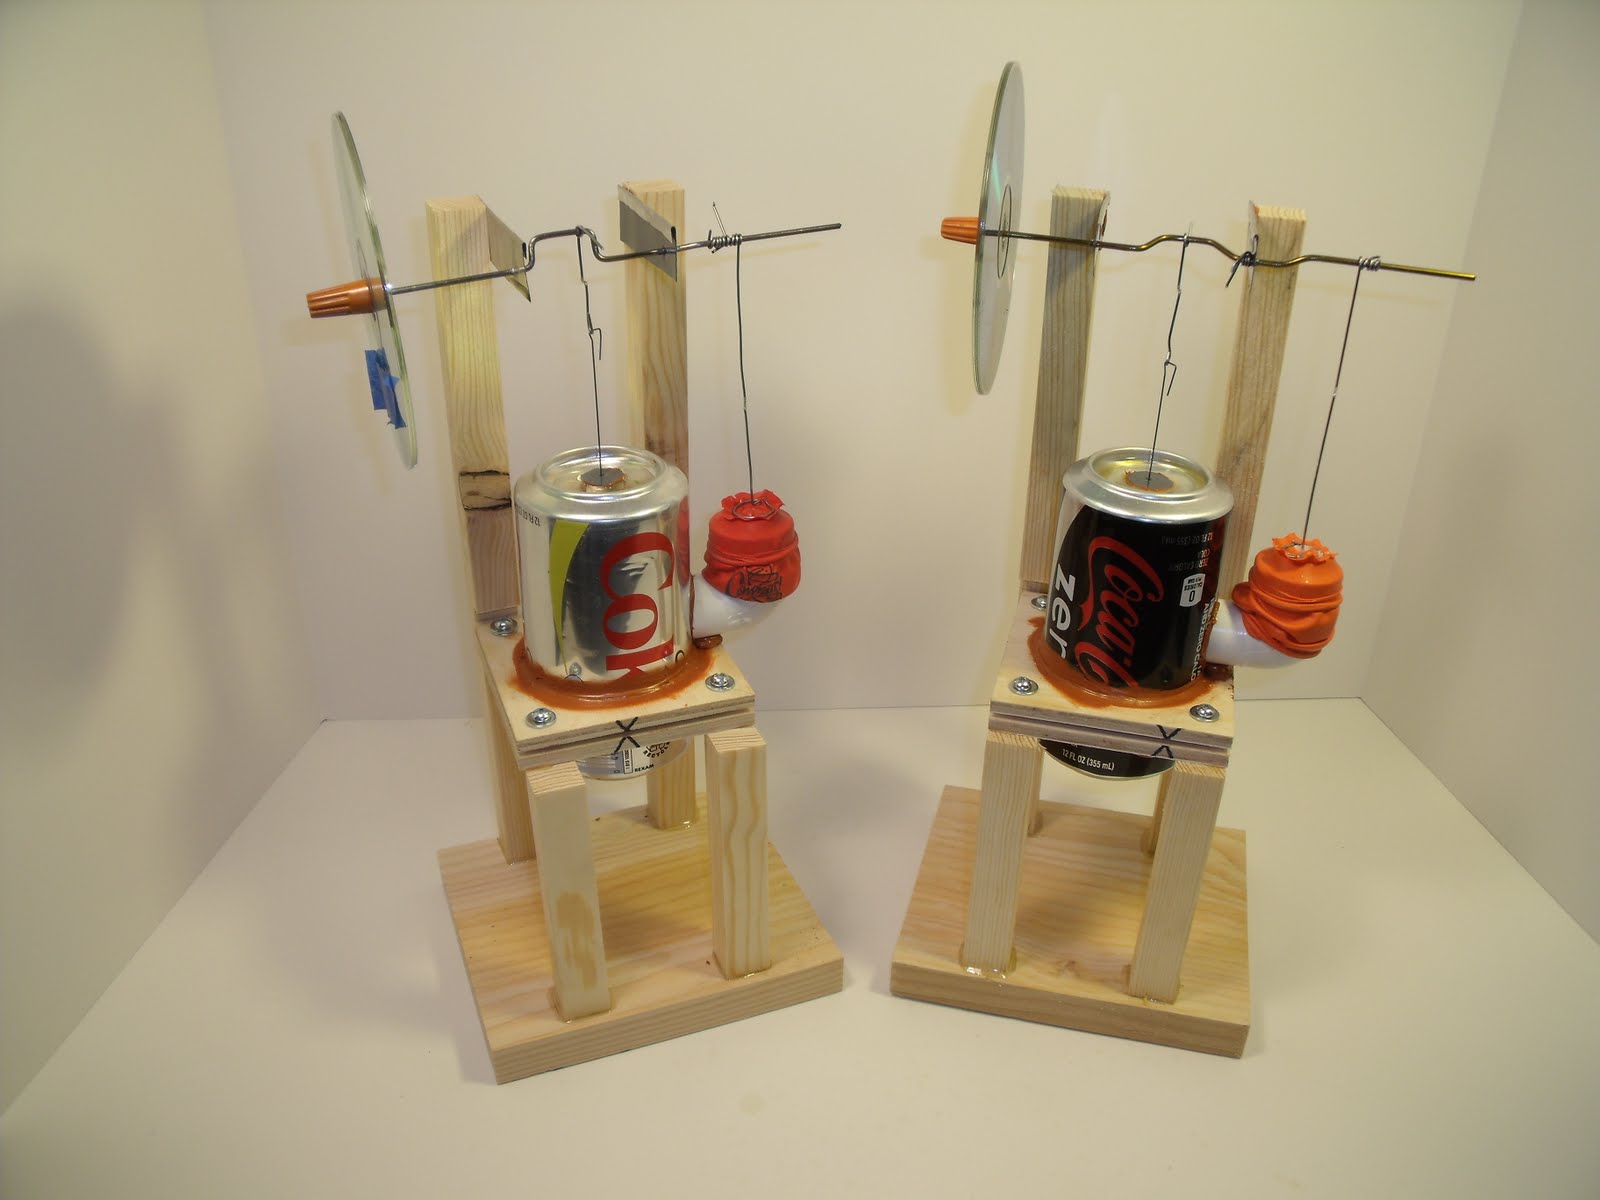 Eleven Stirling Engine Projects You Can